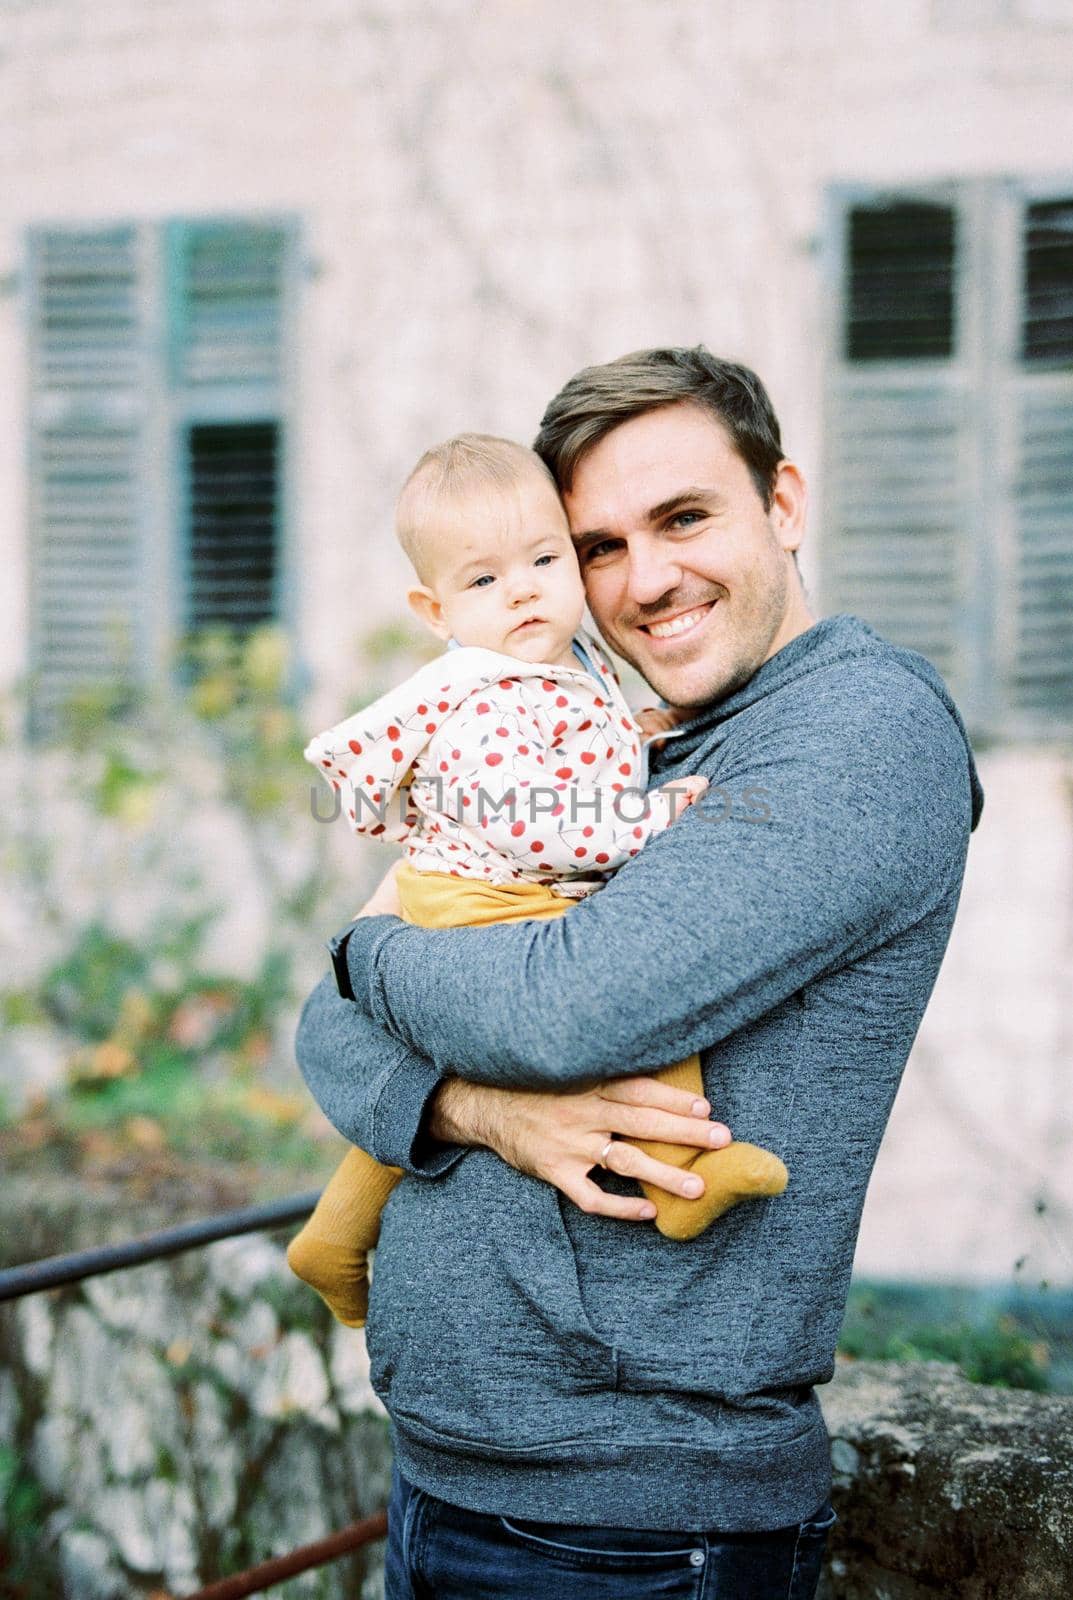 Smiling dad stands at the wall of the house hugging the baby in his arms. High quality photo